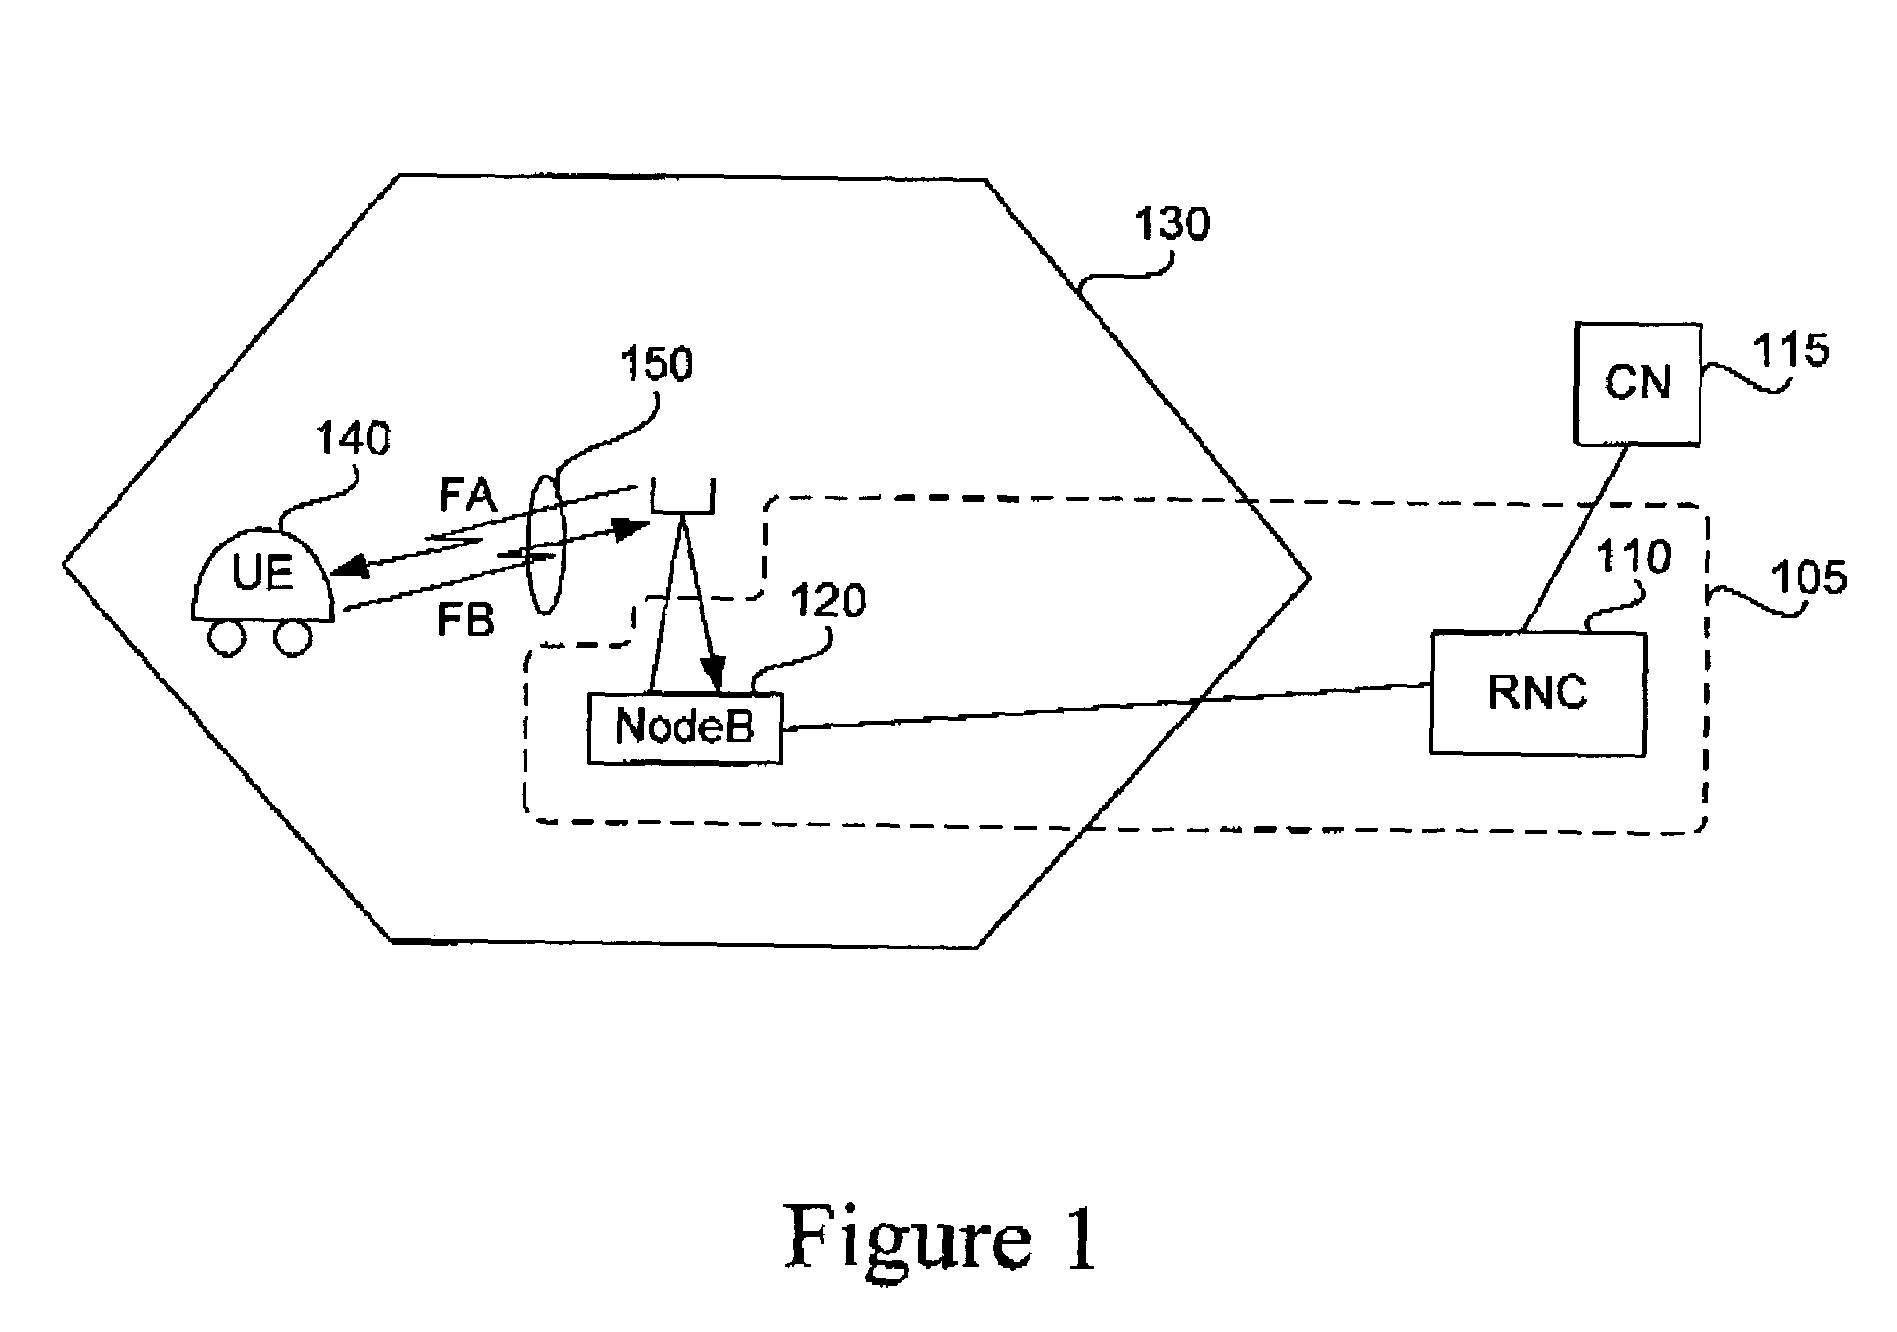 System and method for providing flexible data rate transmission in a telecommunication system